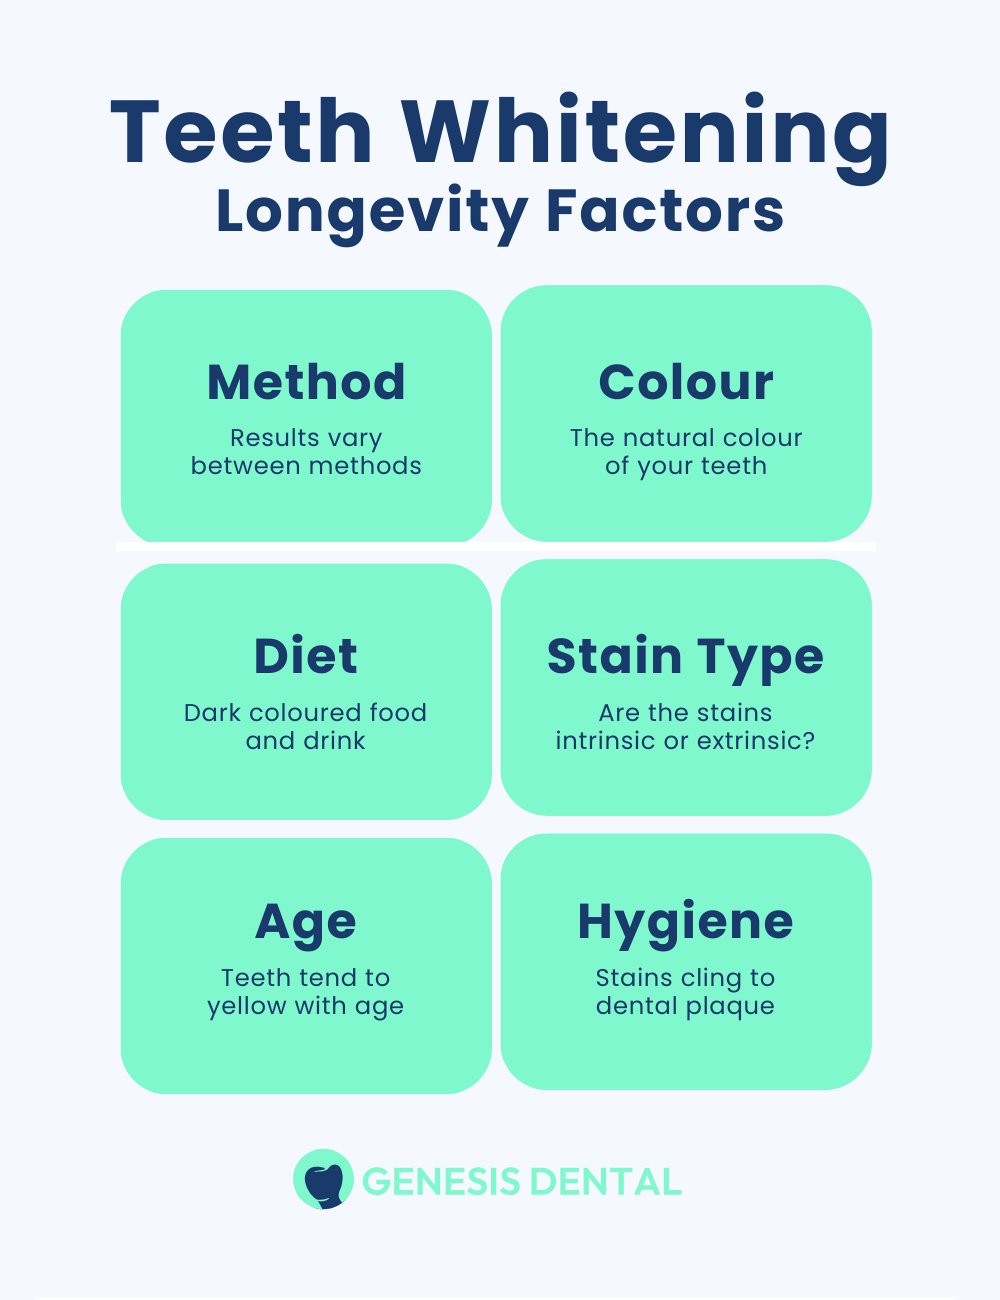 Chart showing factors affecting teeth whitening longevity including method, colour, diet, stain type, age, and hygiene